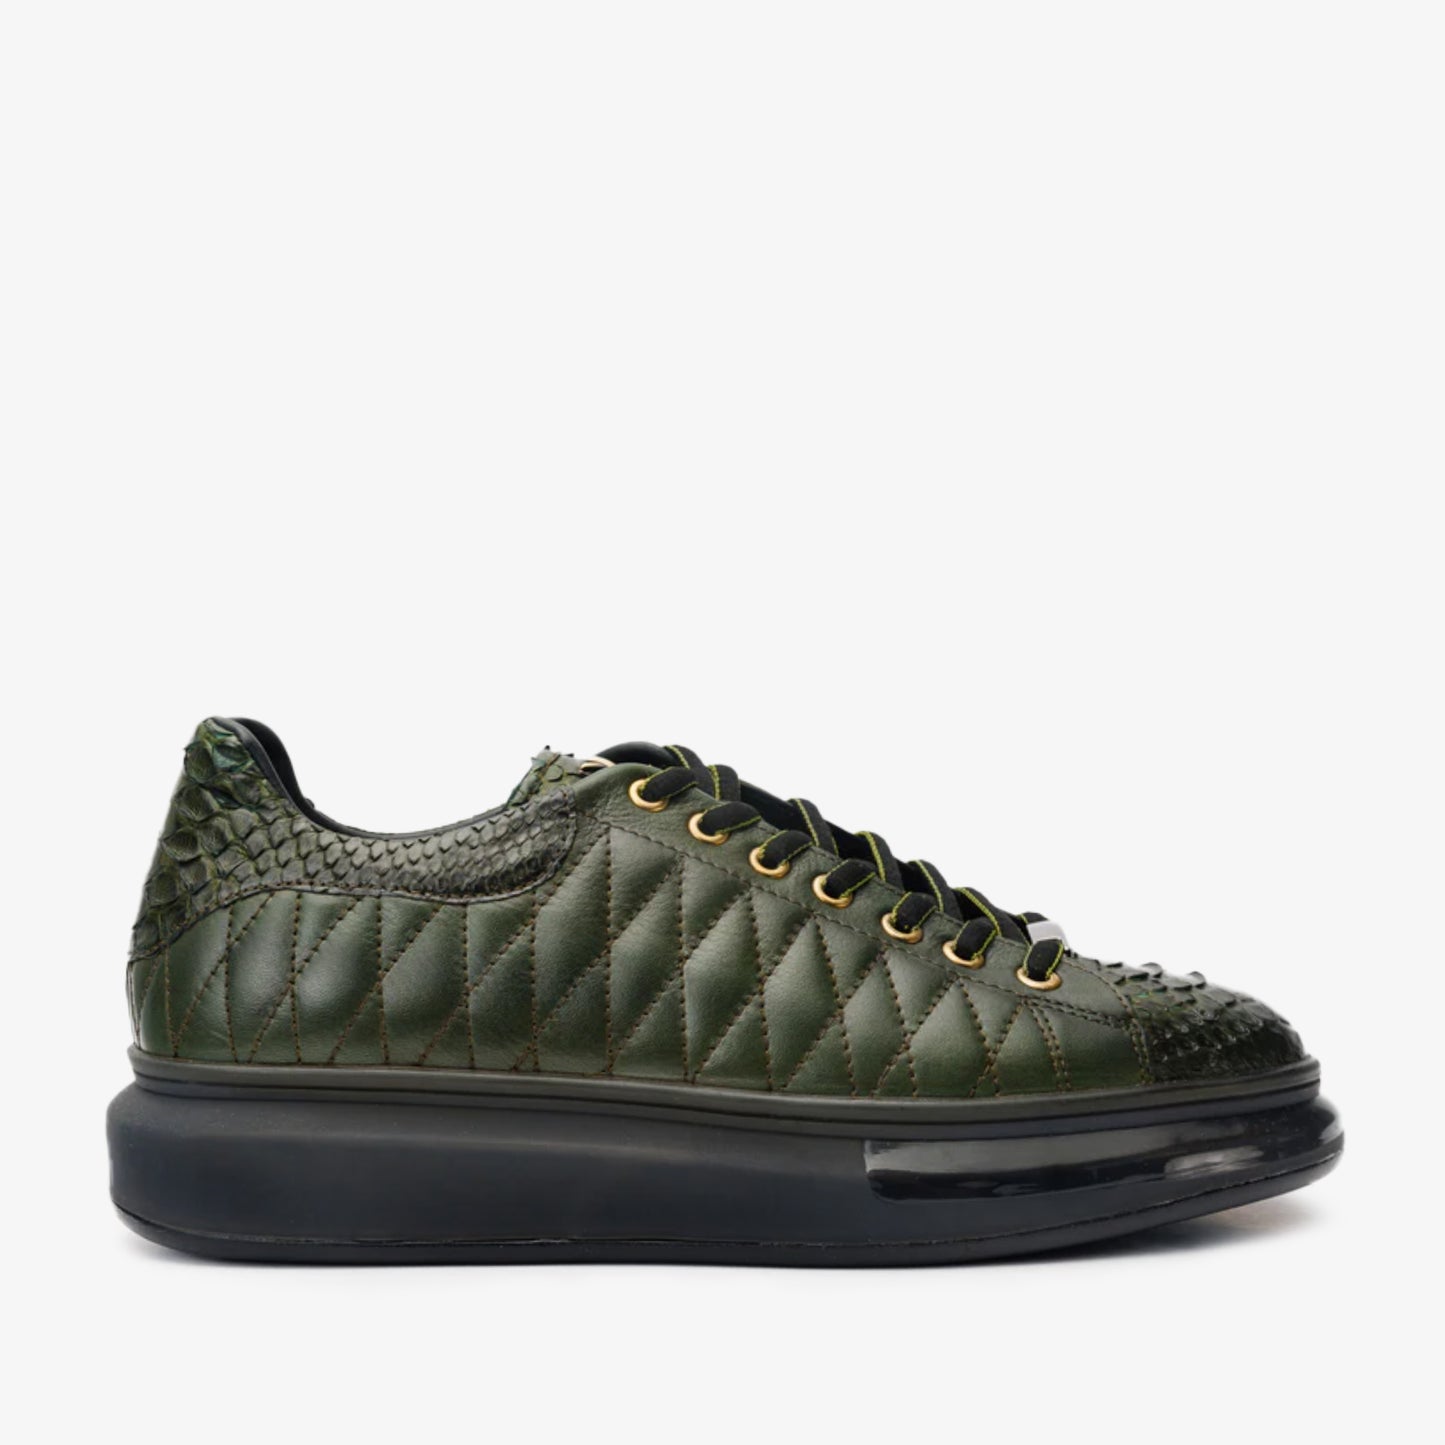 The Adler Green Snk Leather Men Sneaker Limited Edition